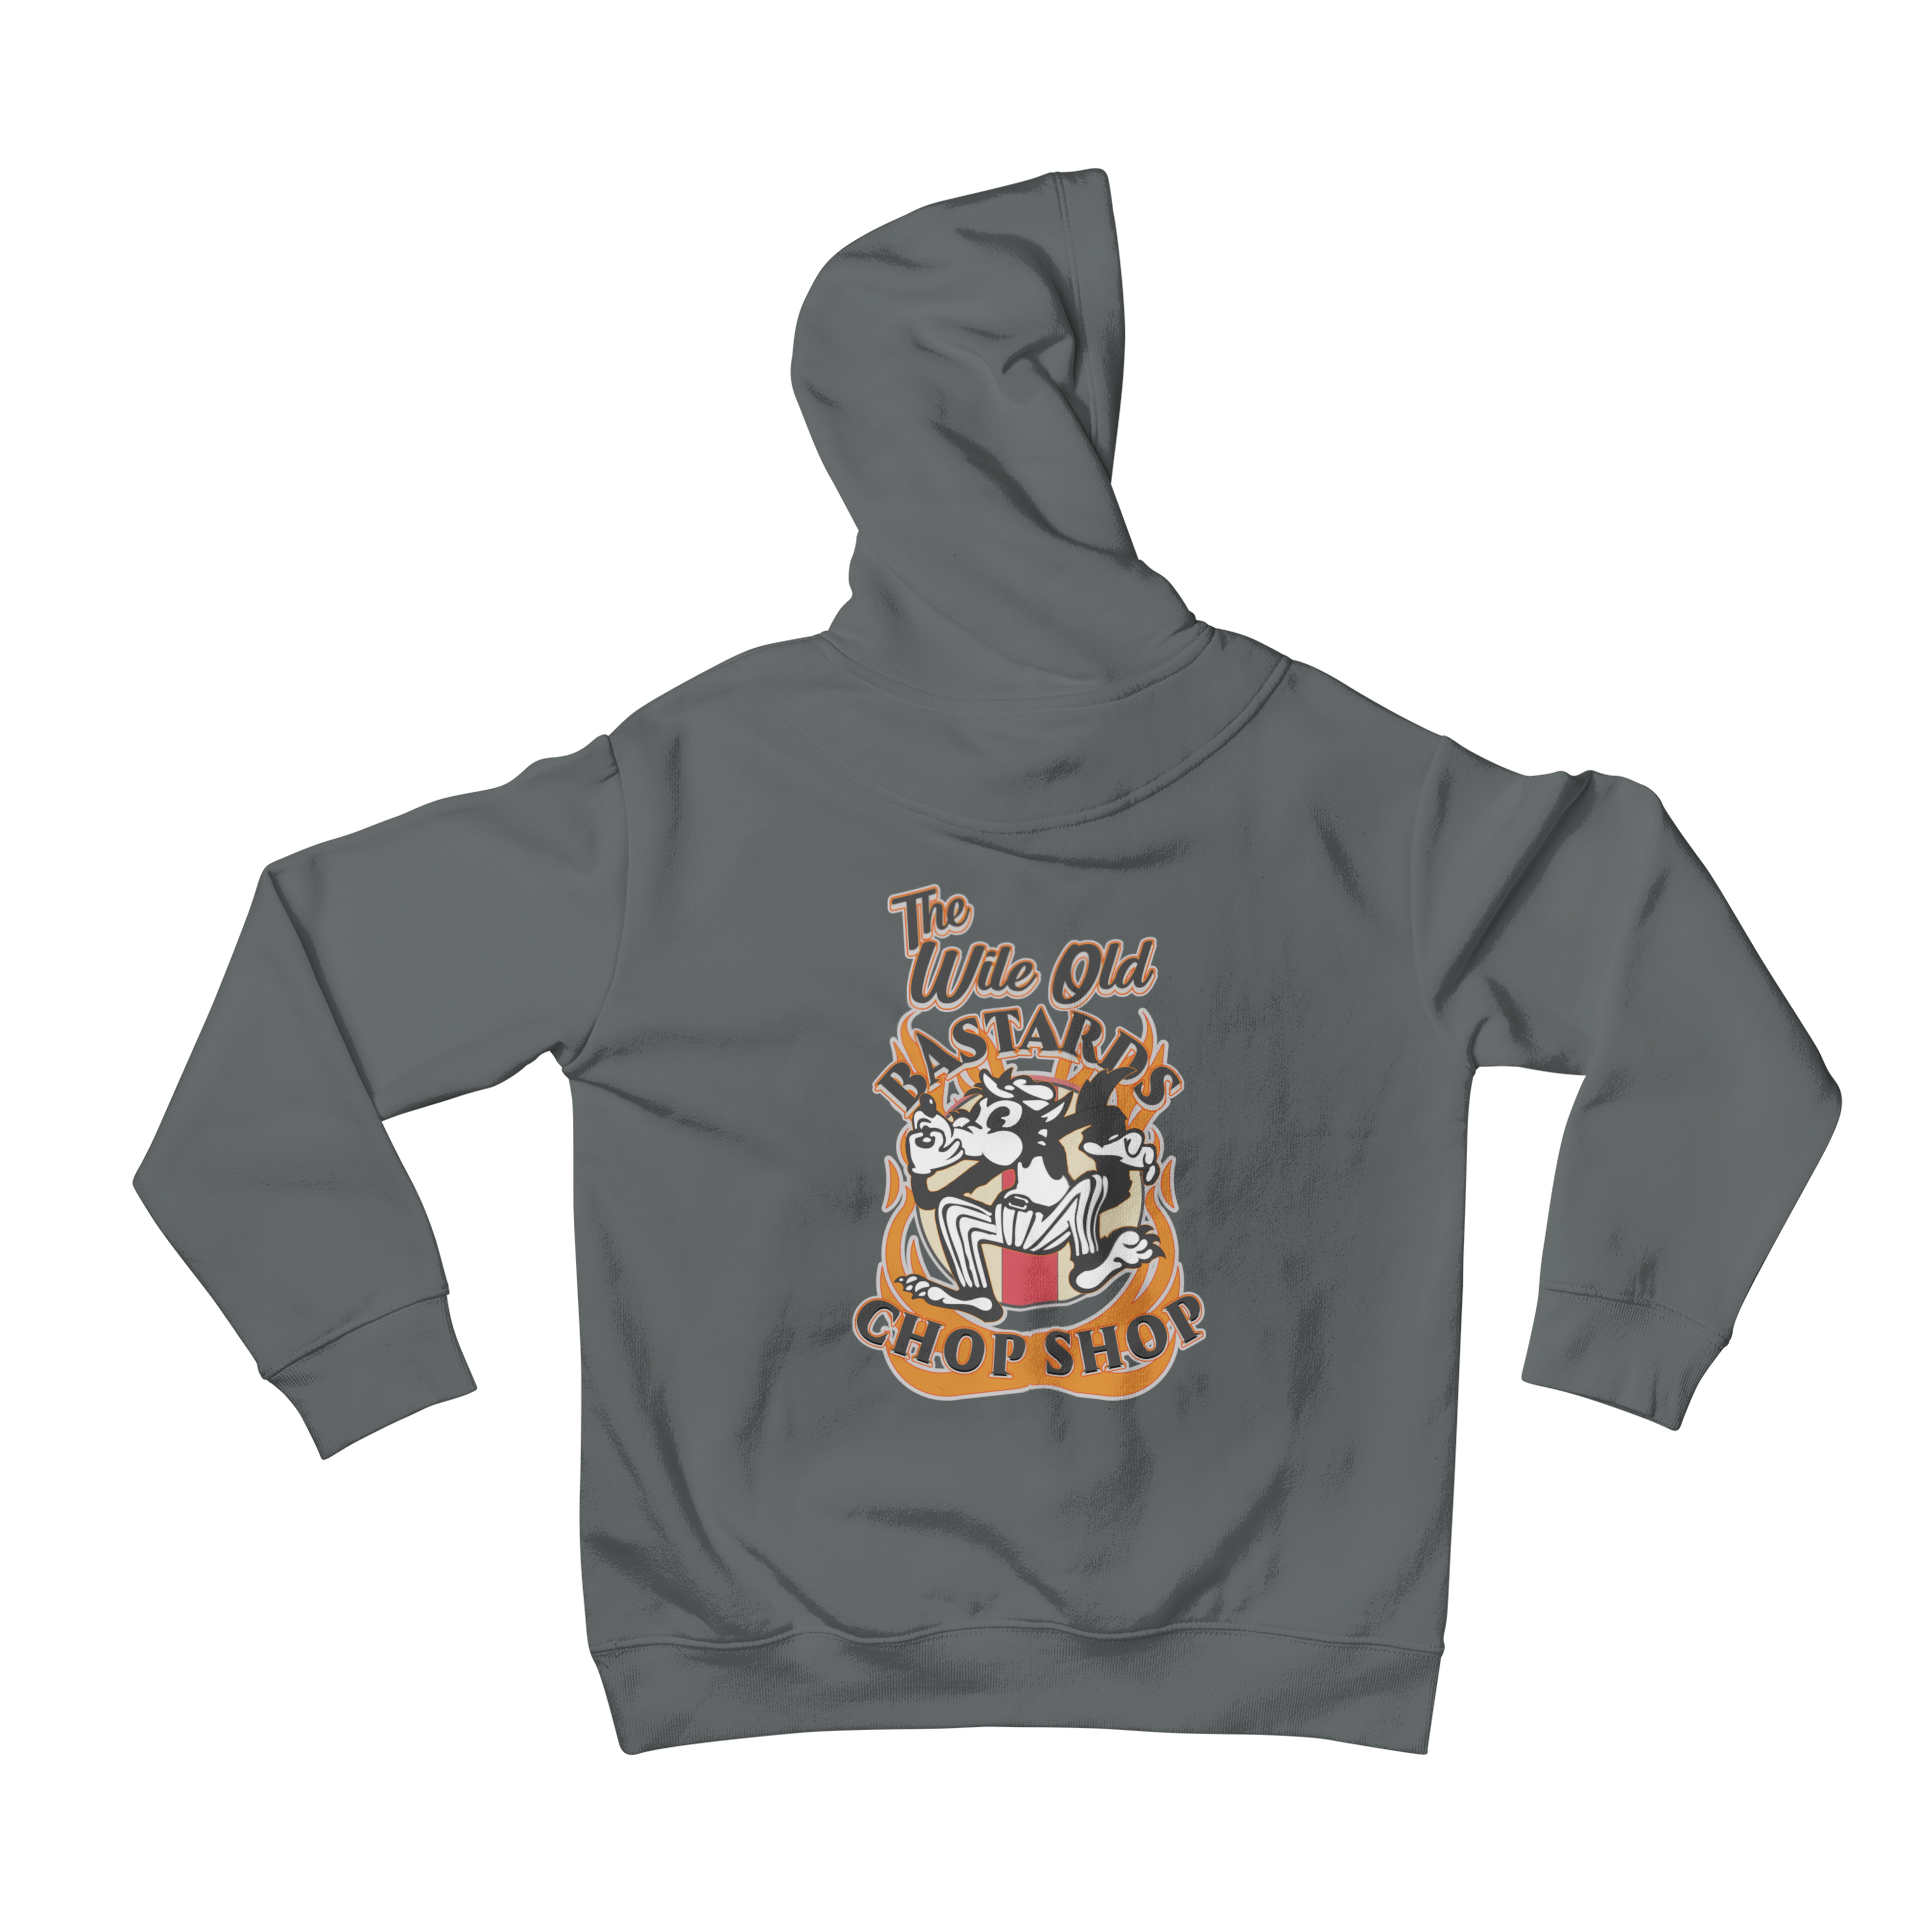 Looking for an awesome hoodie? Check out Teevolution's custom chop shop back print hoodie from Wile Old Basta*ds. This hoodie is perfect for anyone who wants to stand out from the crowd and show off their unique style. Shop now and get your chop on!